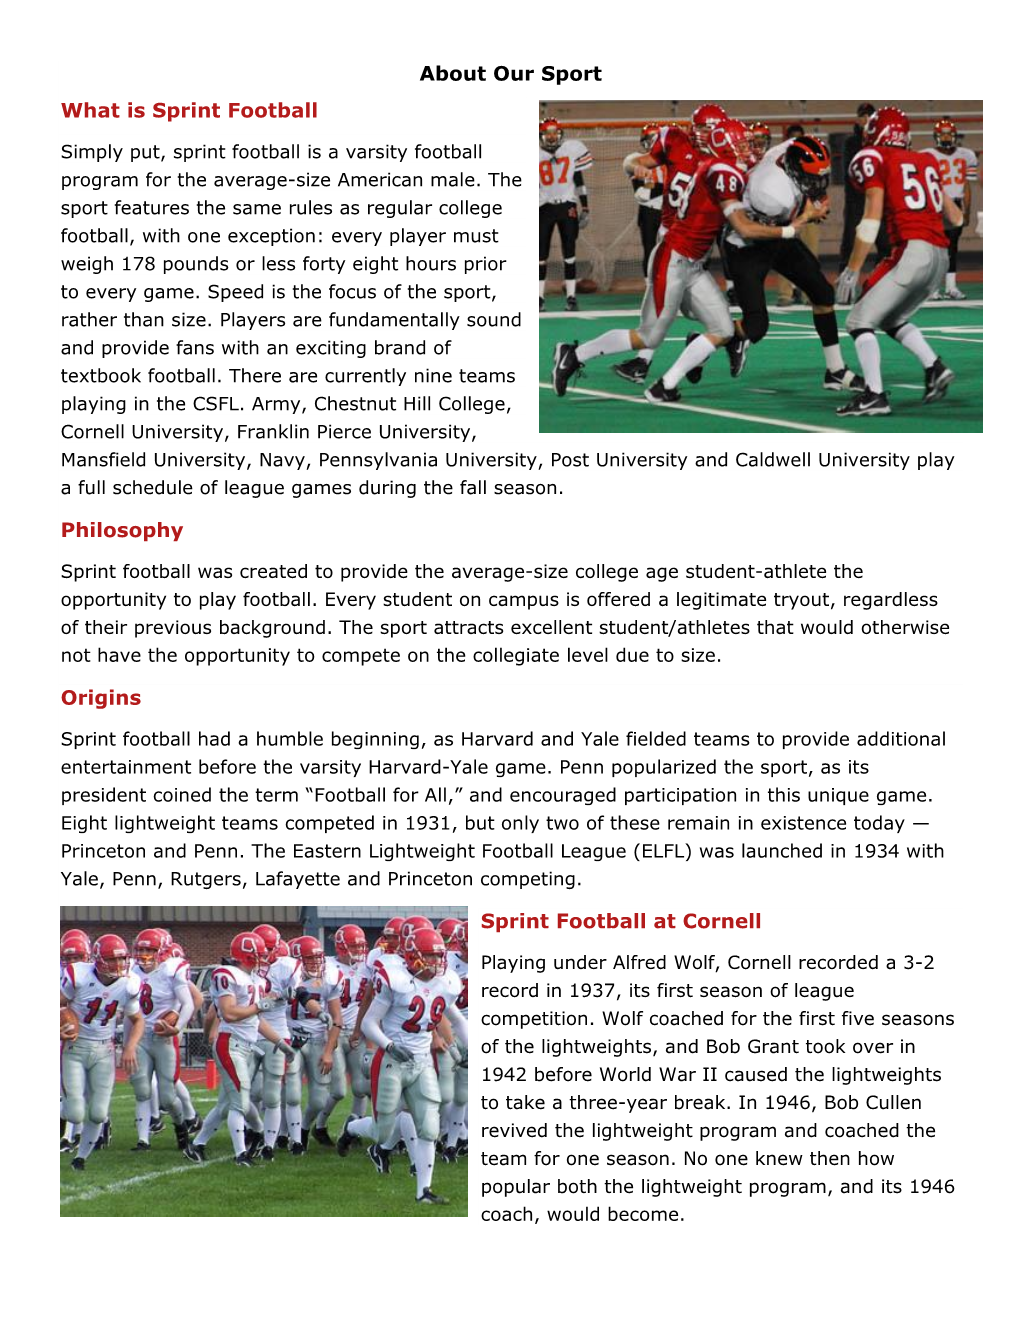 About Our Sport What Is Sprint Football Philosophy Origins Sprint